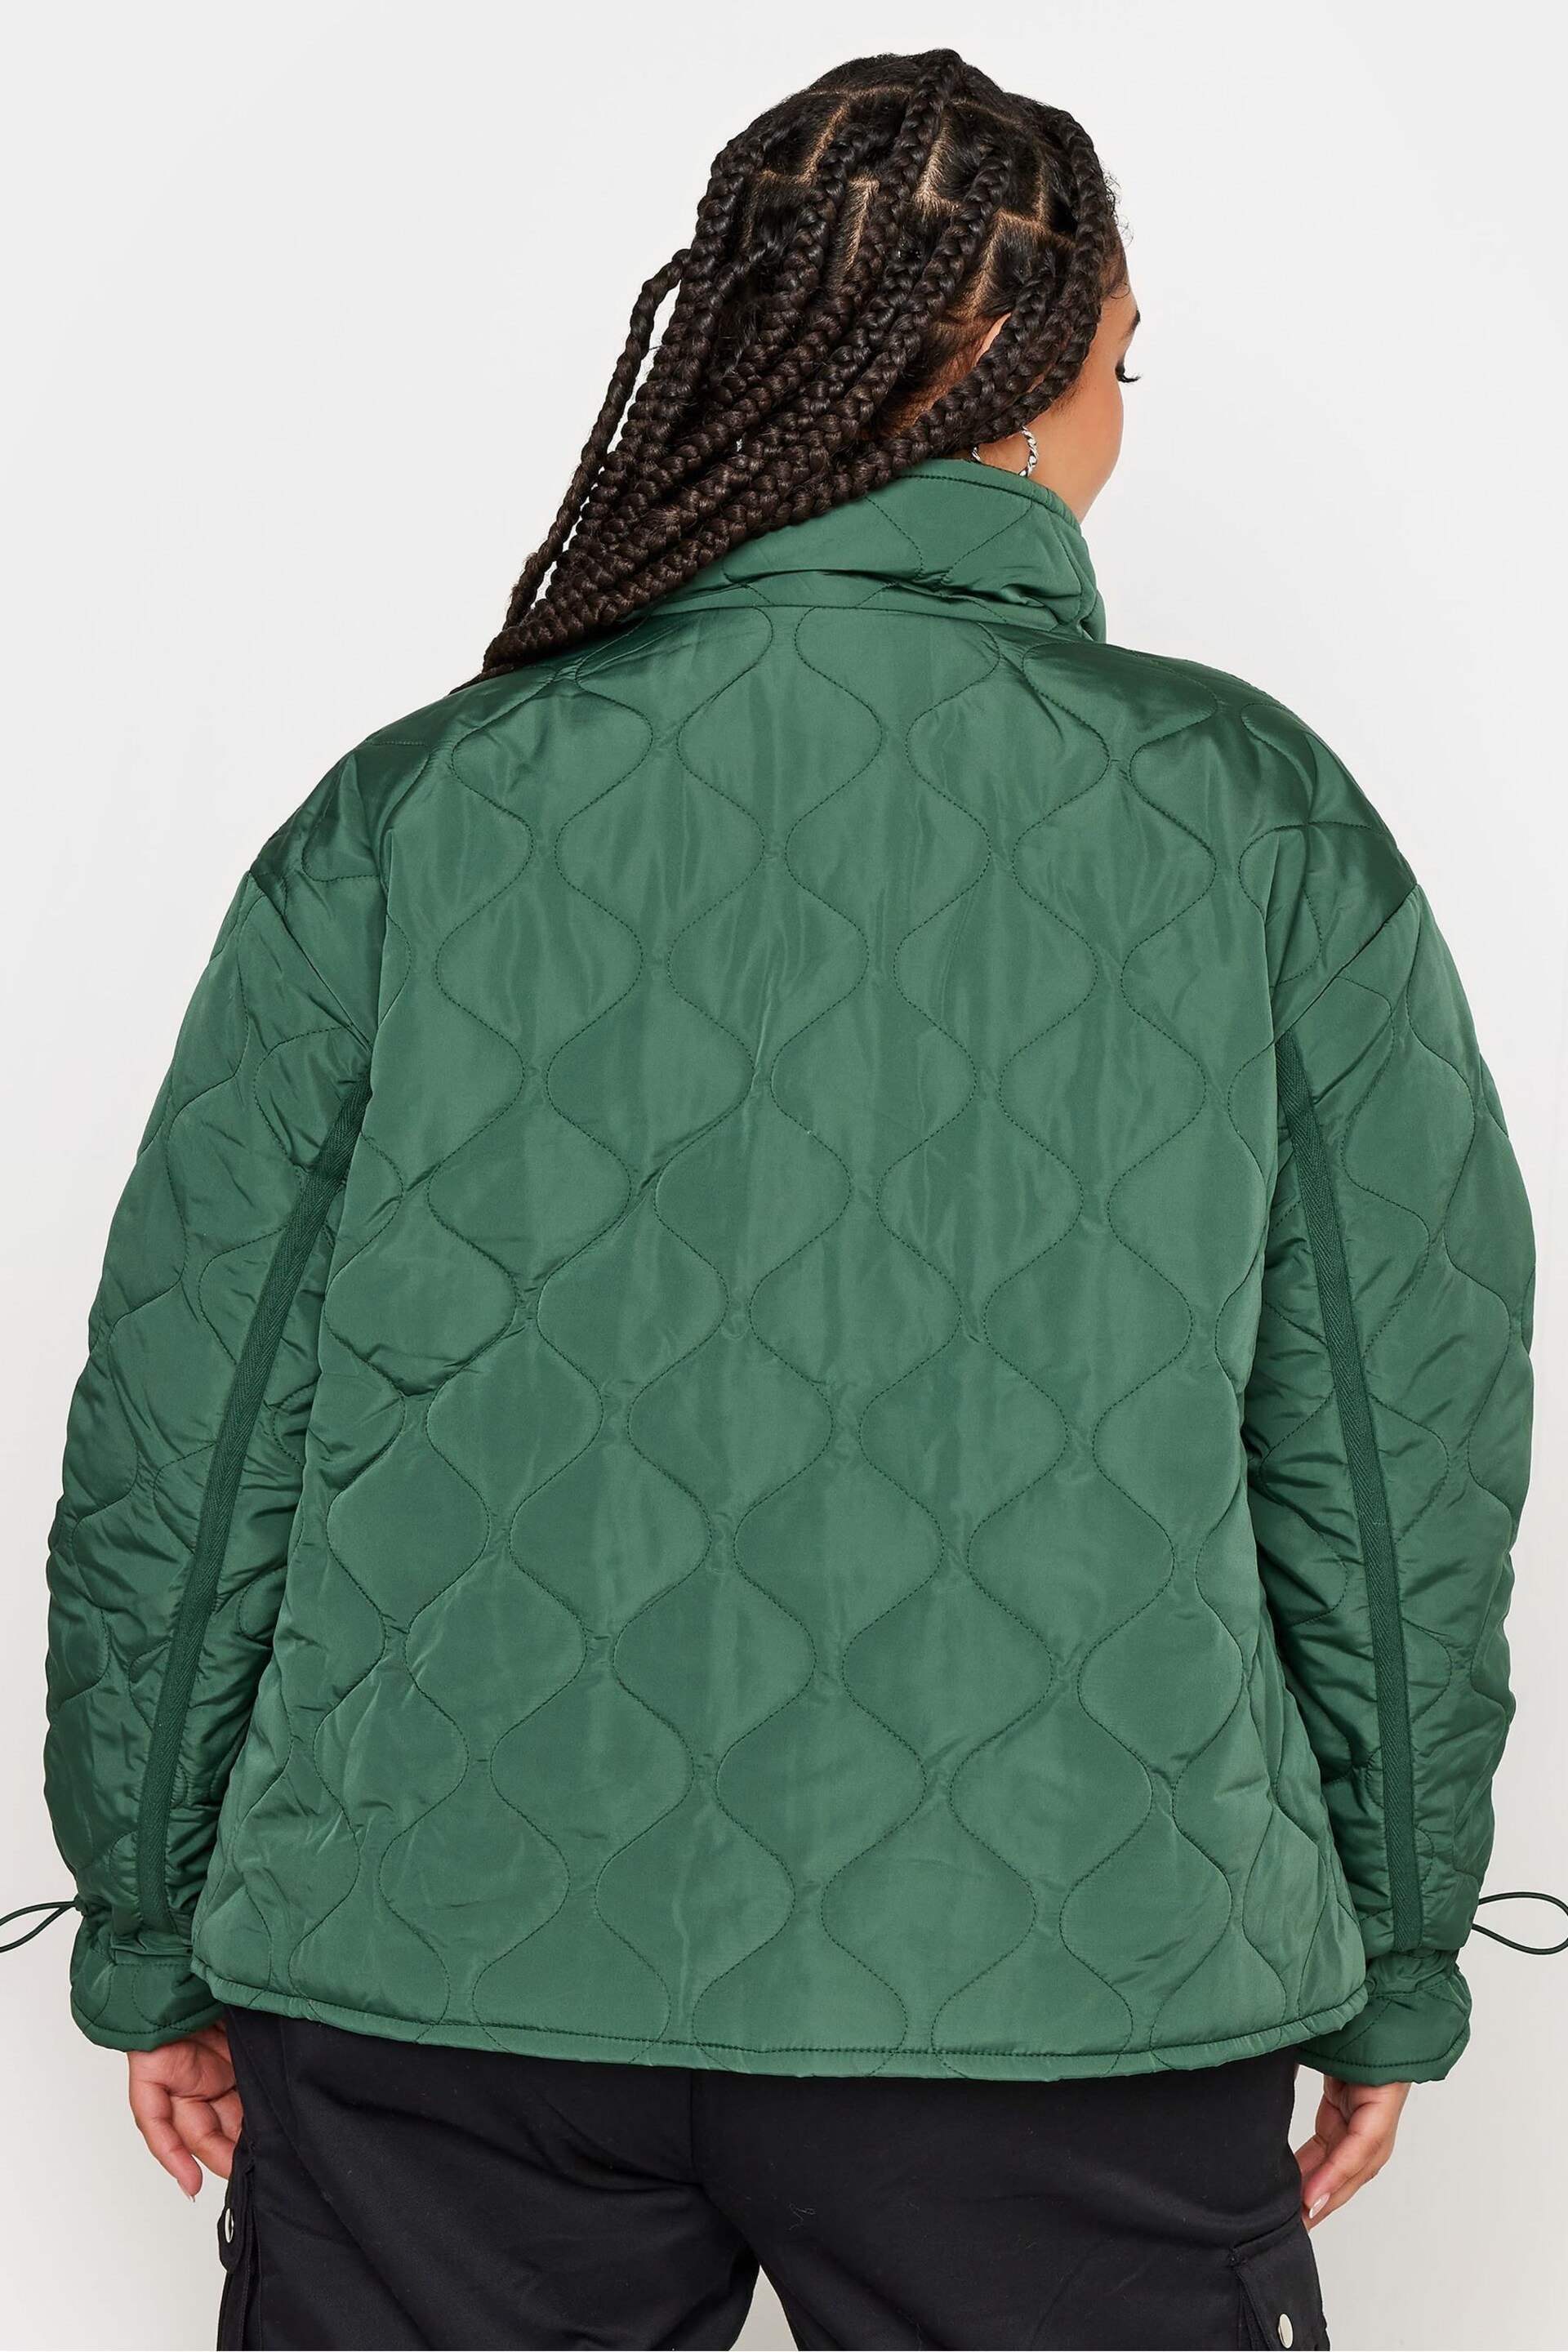 Yours Curve Green Short Onion Jacket - Image 2 of 4